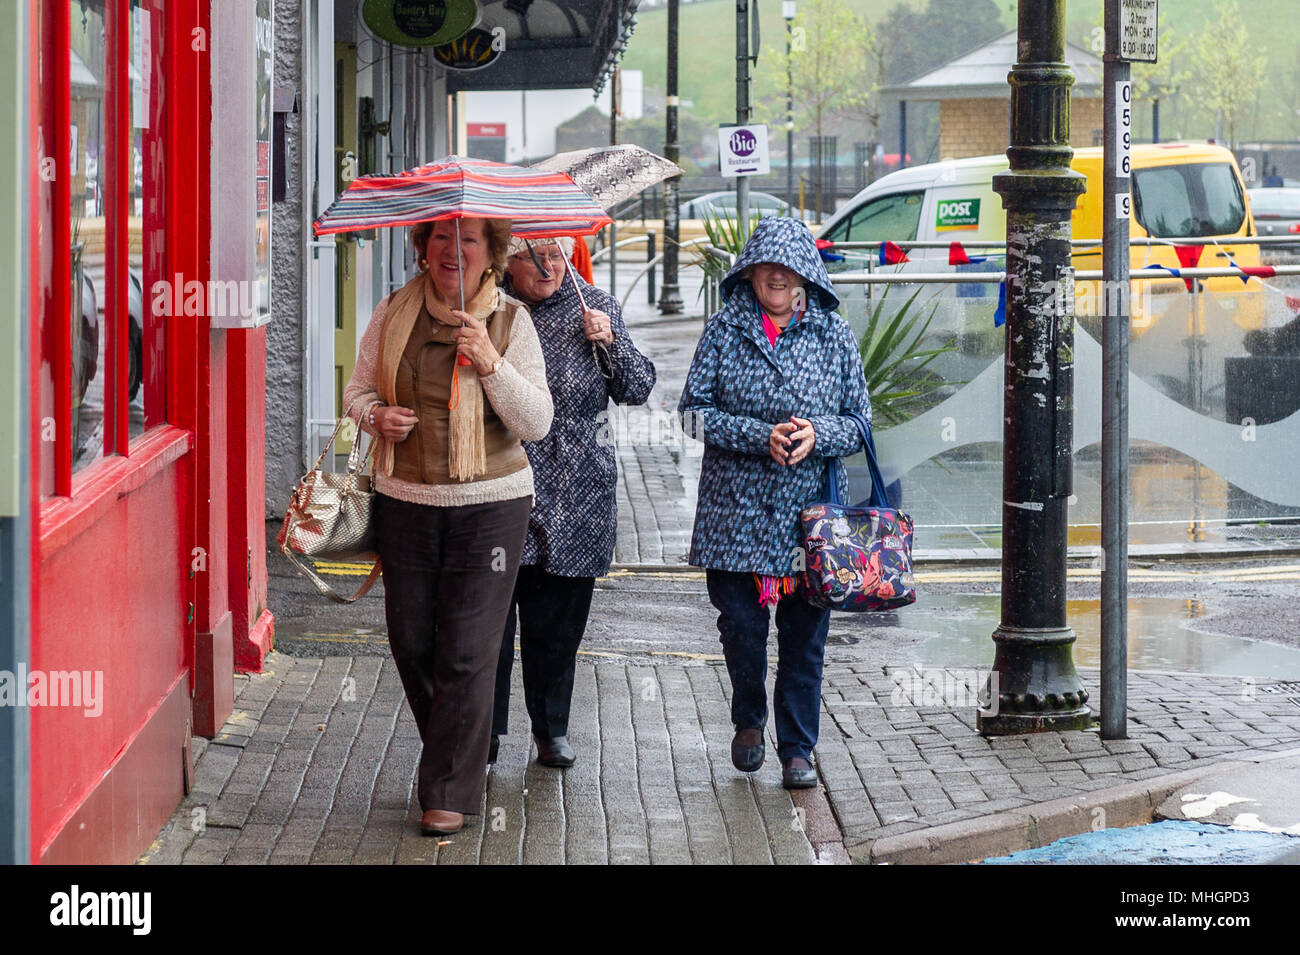 Bantry, Ireland. 1st May, 2018. A group of ladies seem to be happy as they struggle against the persistent rain and wind in Bantry, West Cork, Ireland. The rain will continue into the afternoon but drier weather will develop by evening. Credit: Andy Gibson/Alamy Live News. Stock Photo